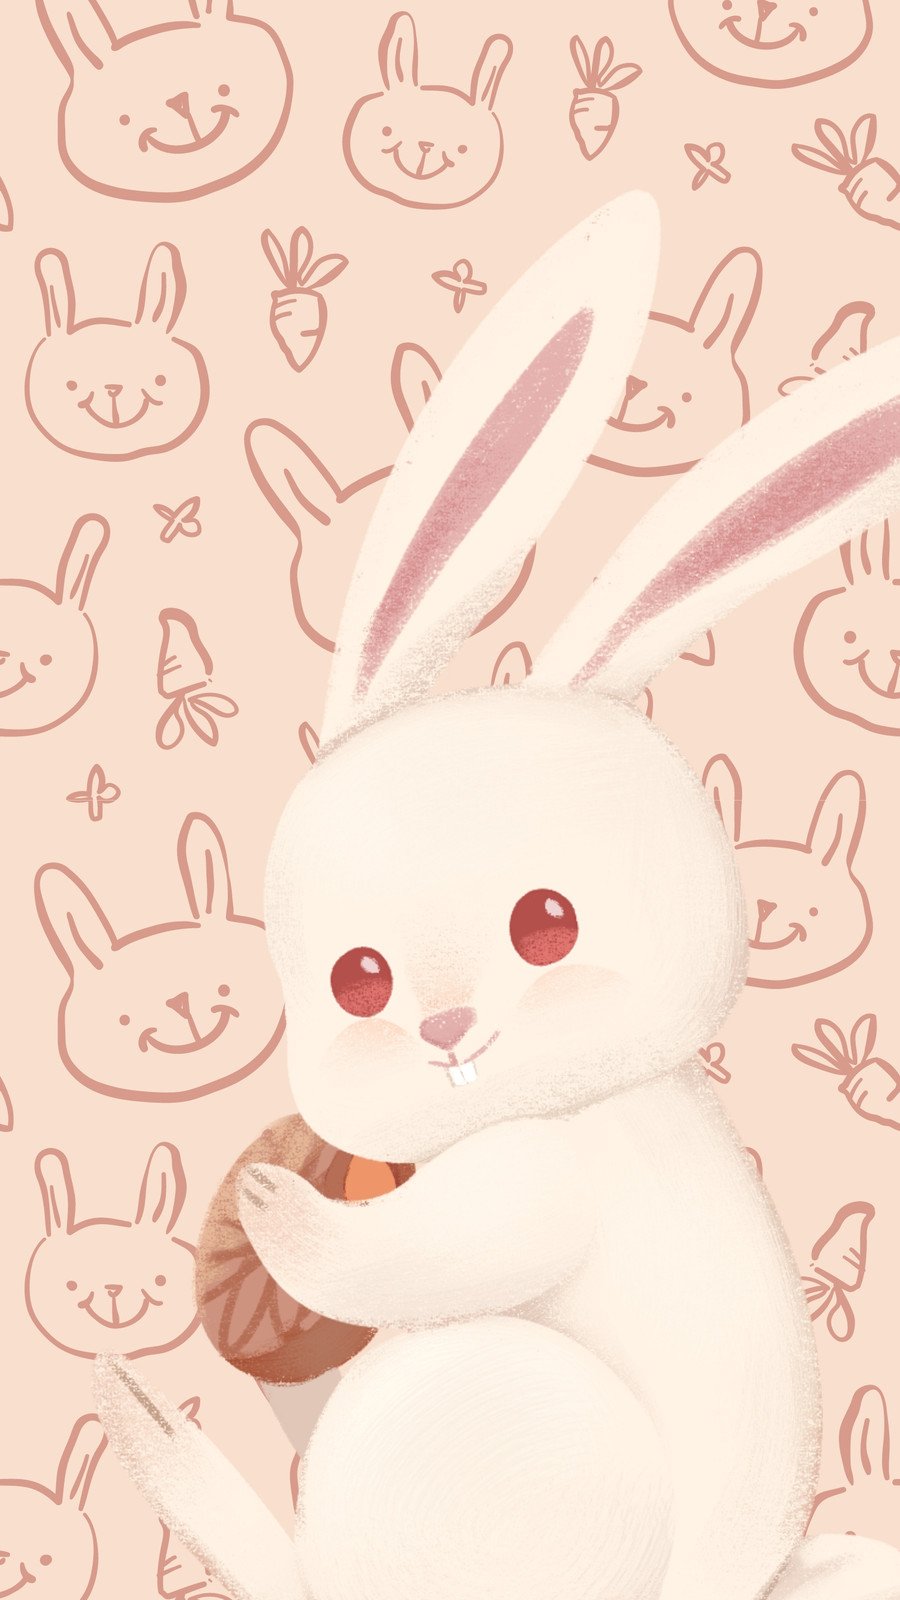 Free and customizable bunny templates